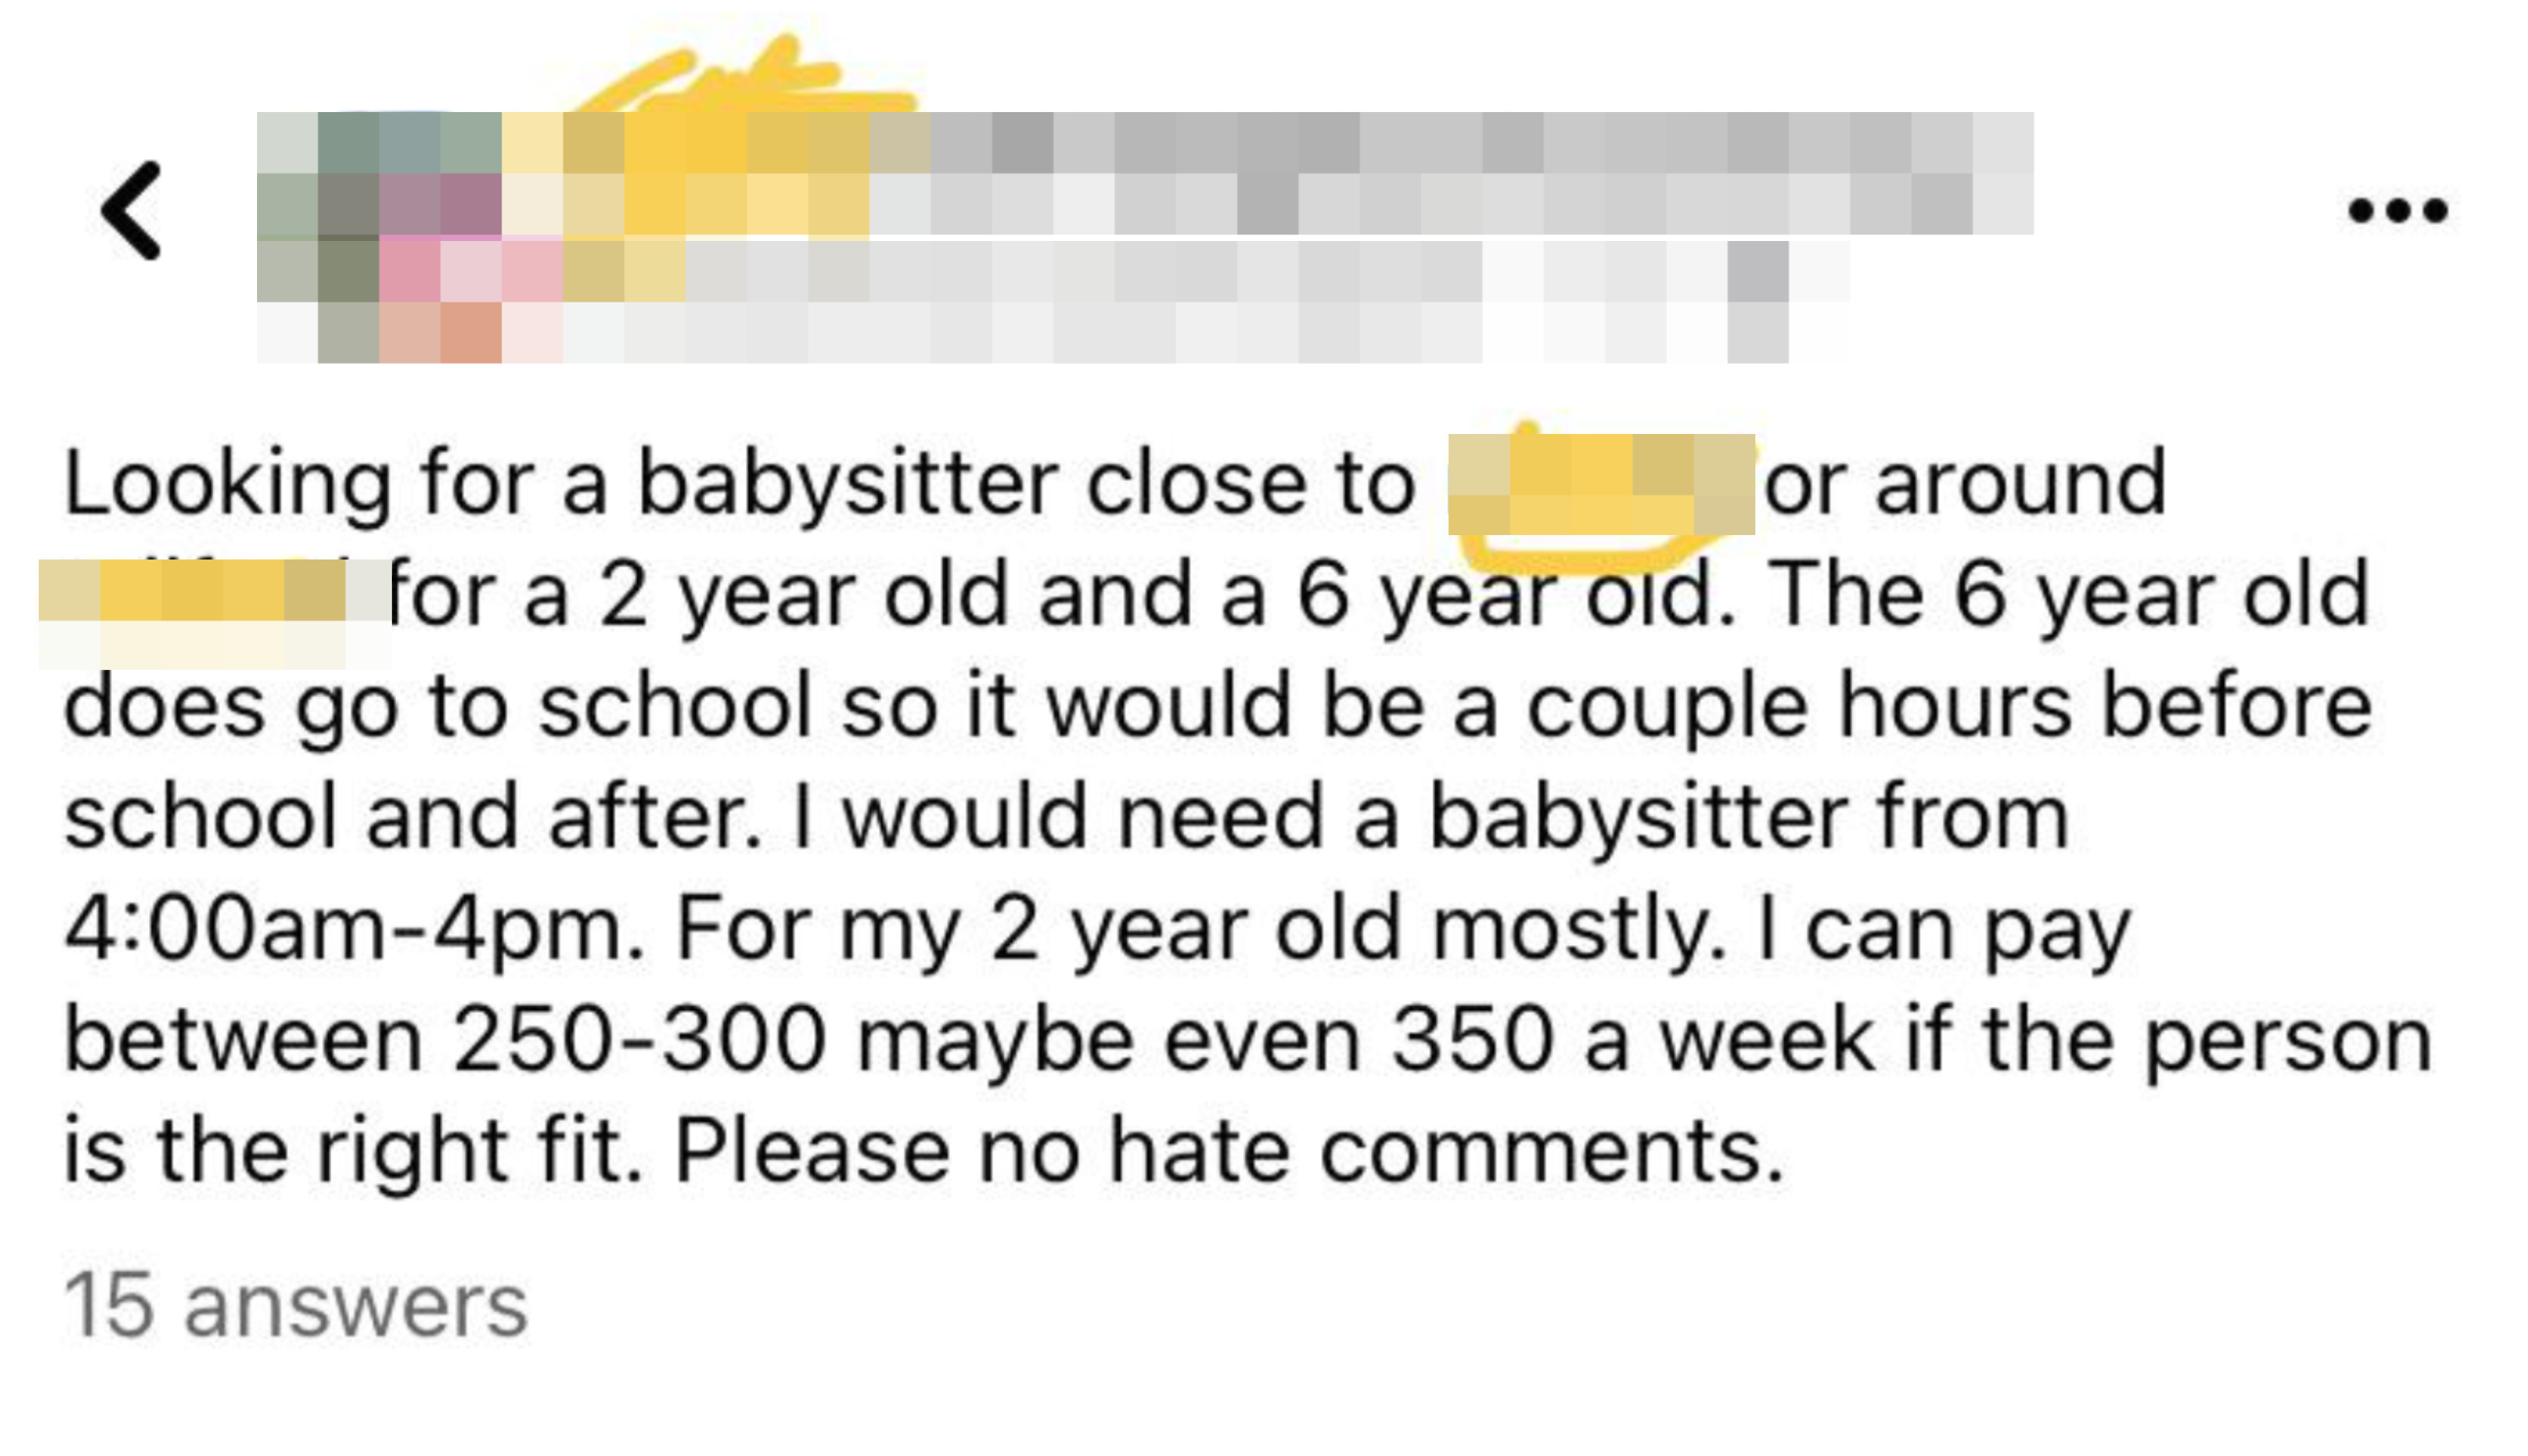 &quot;I would need babysitter from 4:00am-4pm.&quot;